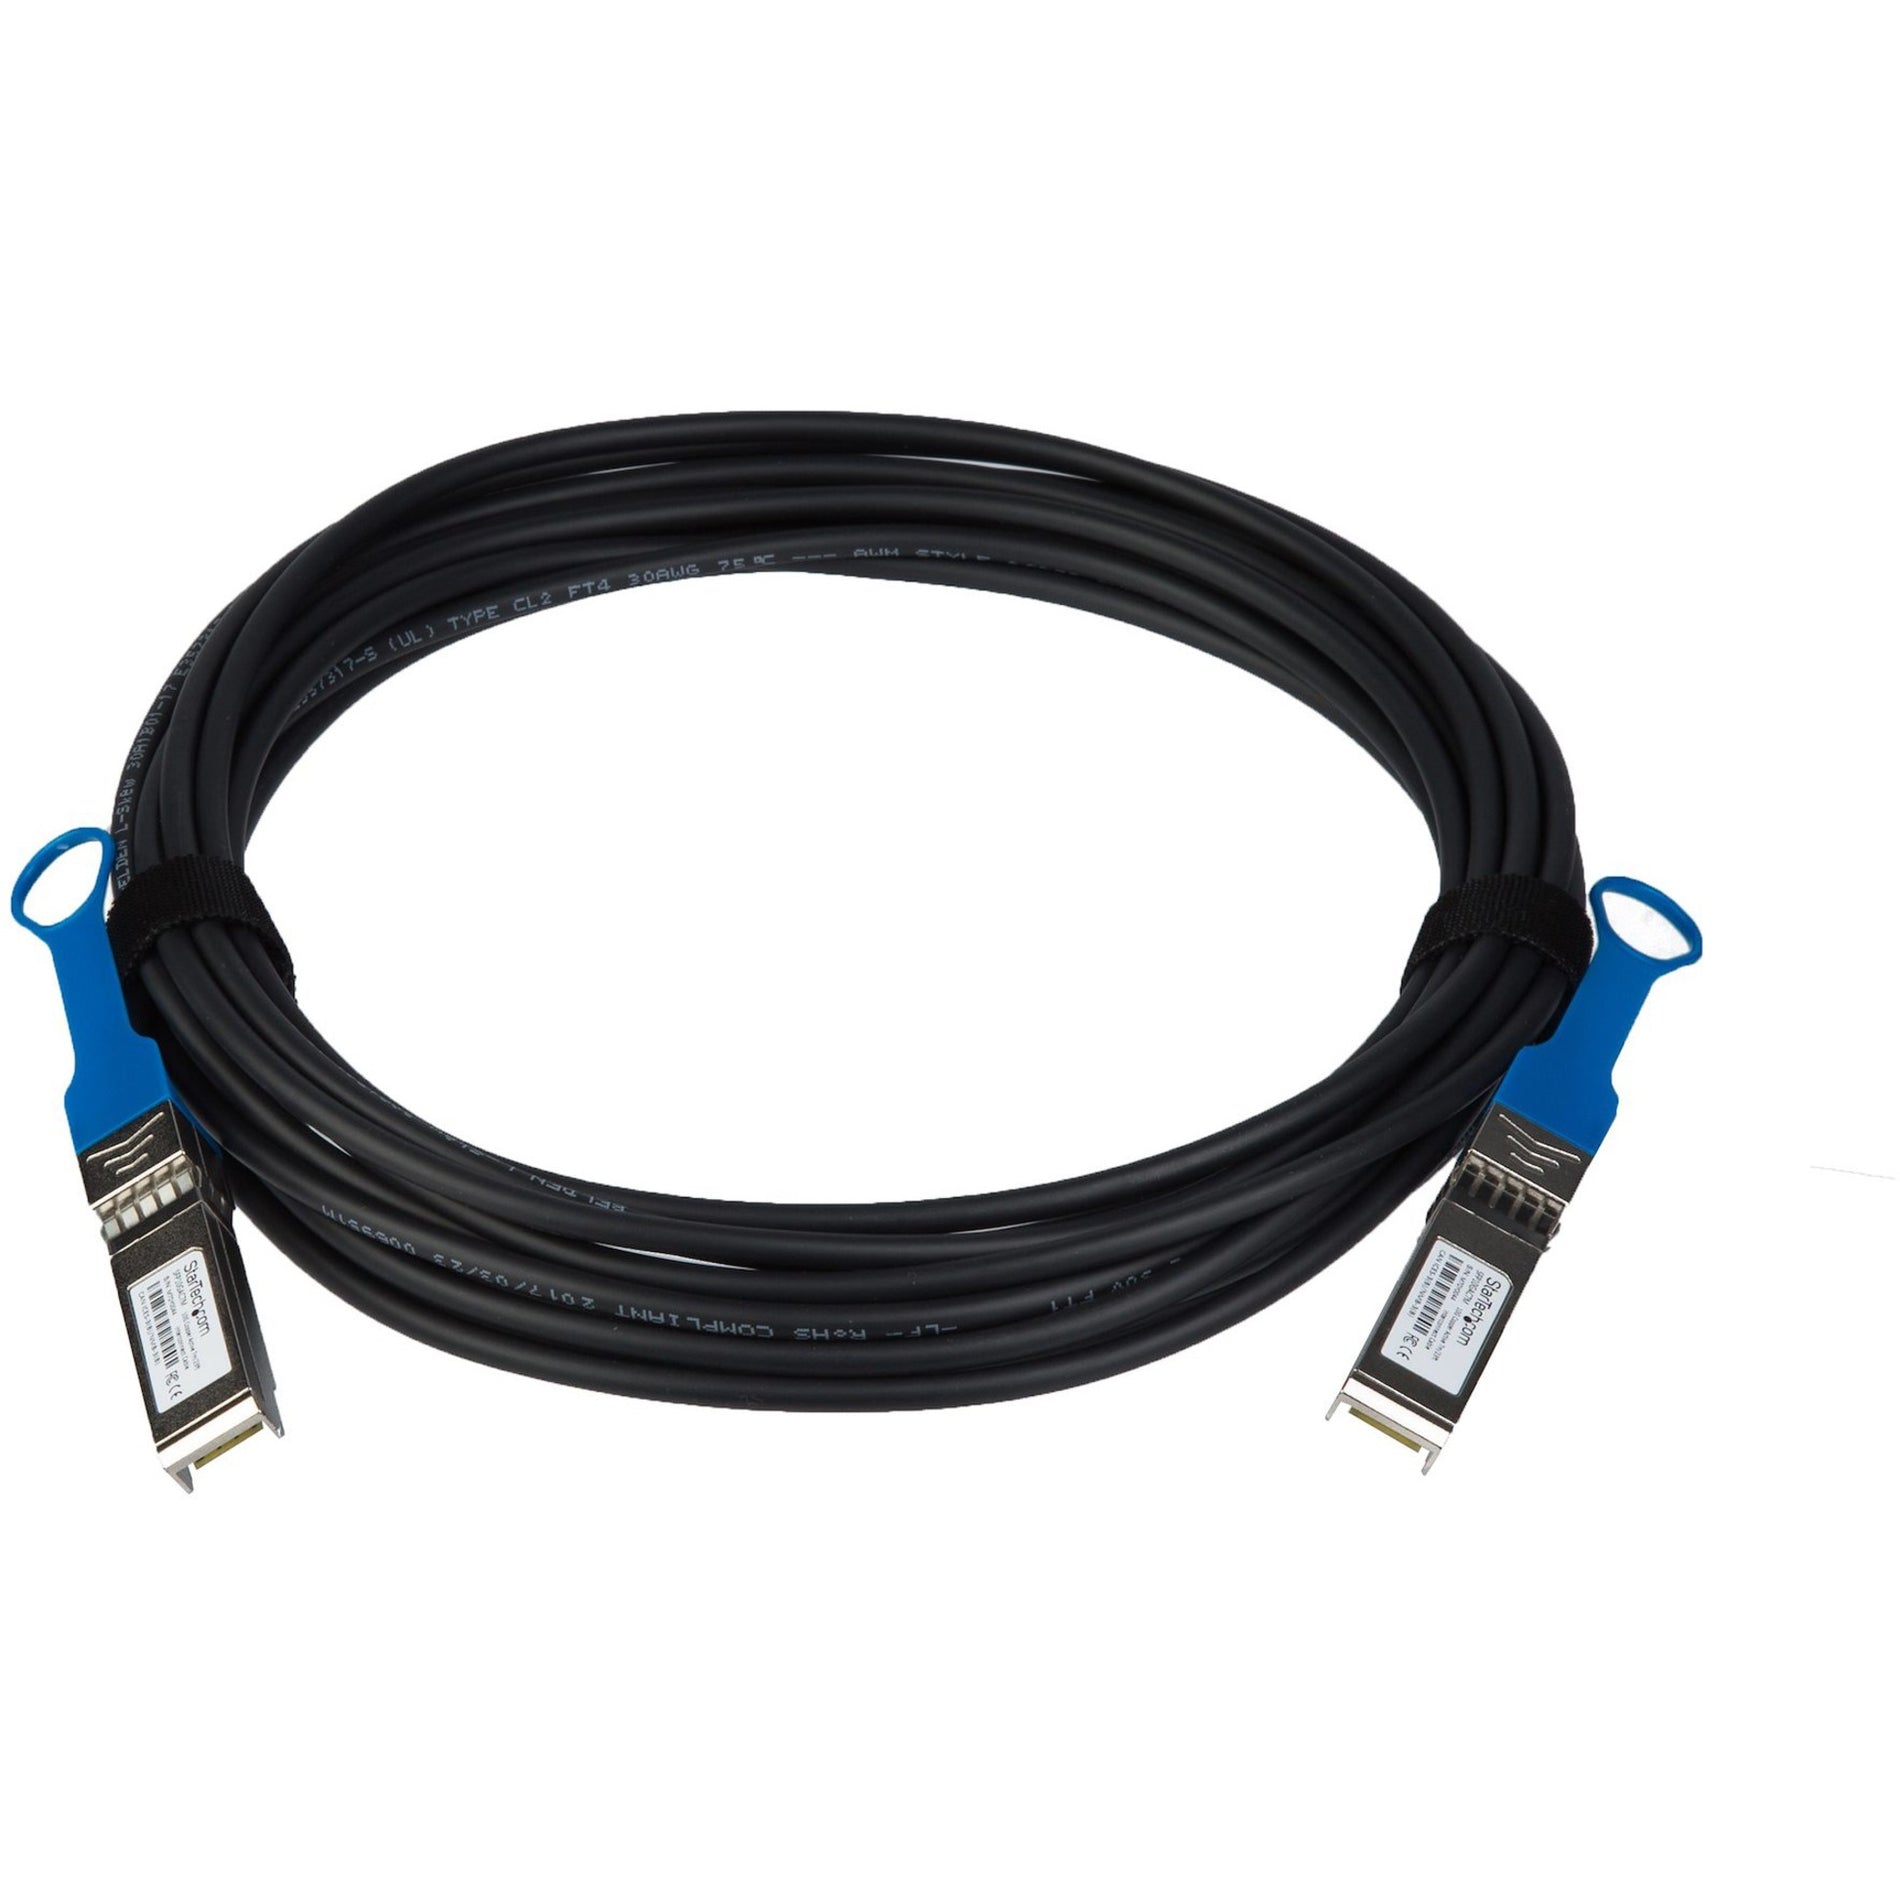 StarTech.com SFP10GAC7M SFP+ Direct Attach Cable - MSA Compliant - 7 m (23 ft.), Active, Hot-swappable, 10 Gbit/s